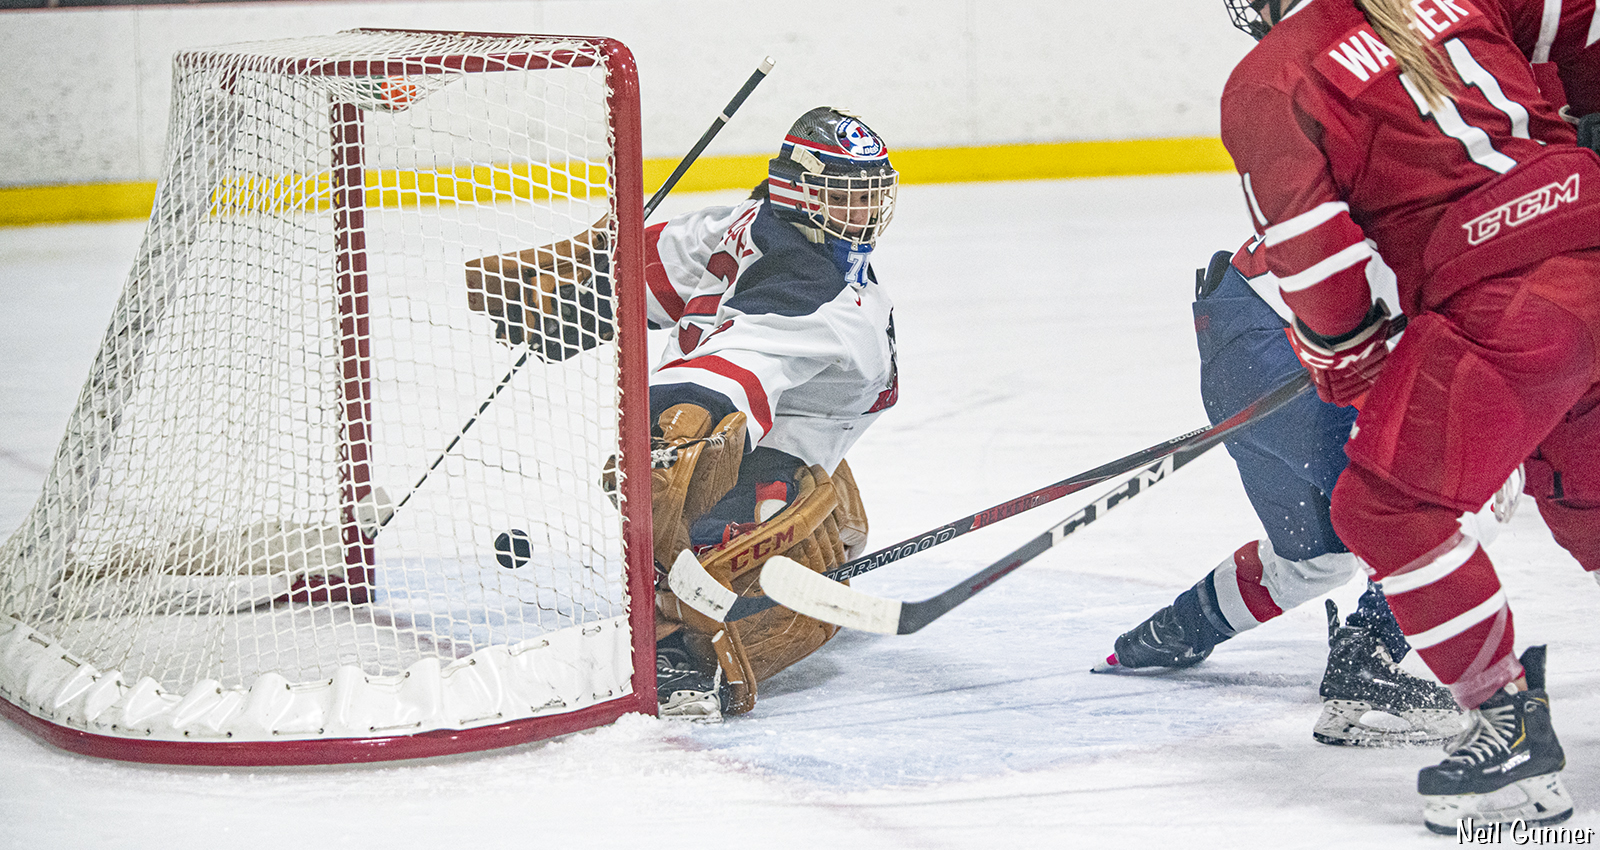 Home Page hero image 3: York Lions hockey scores a goal